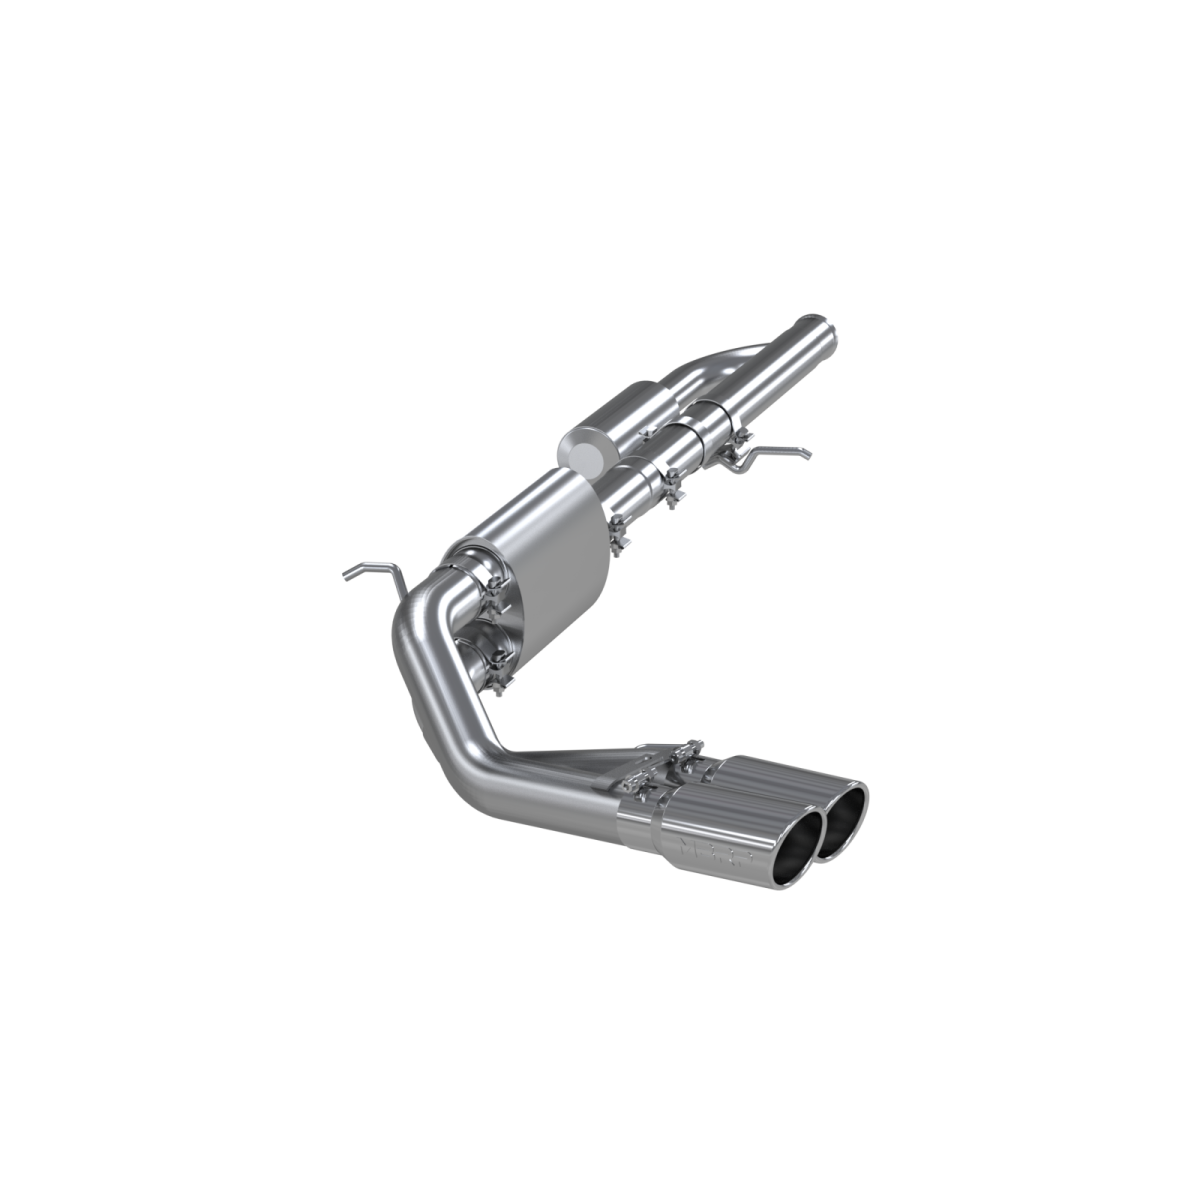 MBRP - MBRP 3 Inch Cat Back Exhaust System Pre-Axle Dual Outlet T409 Stainless Steel For 09-18 Silverado/Sierra 1500 4.3L V6, 5.3L V8 with one-piece driveshaft excluding Regular cab 19-19 Silverado/Sierra 1500 4.3L V6, 5.3L V8 Limited LD S5081409